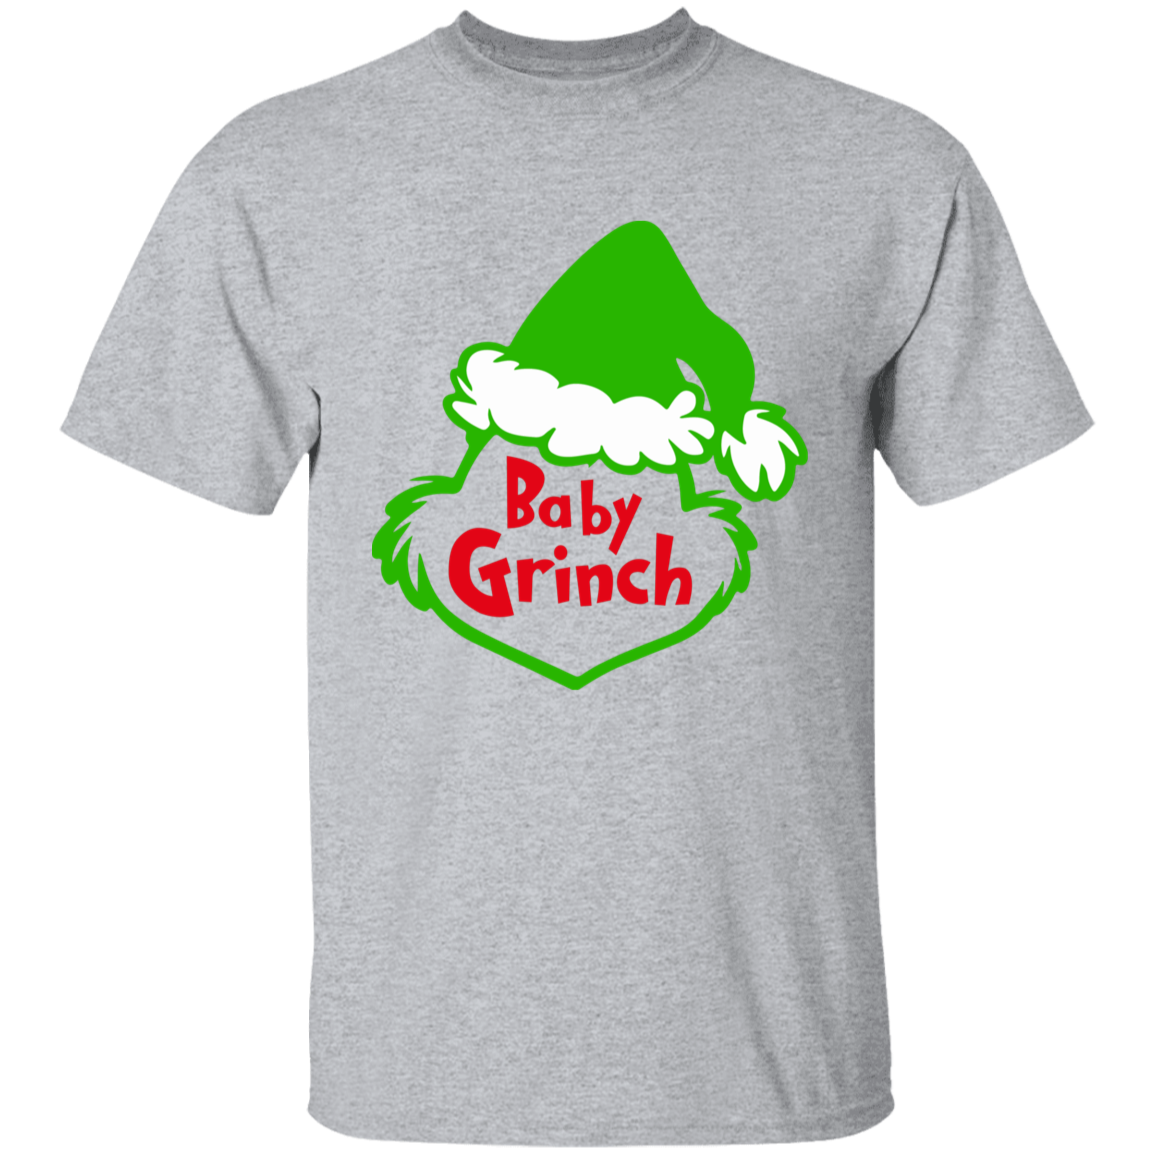 Baby Grinch Youth 5.3 oz 100% Cotton T-Shirt